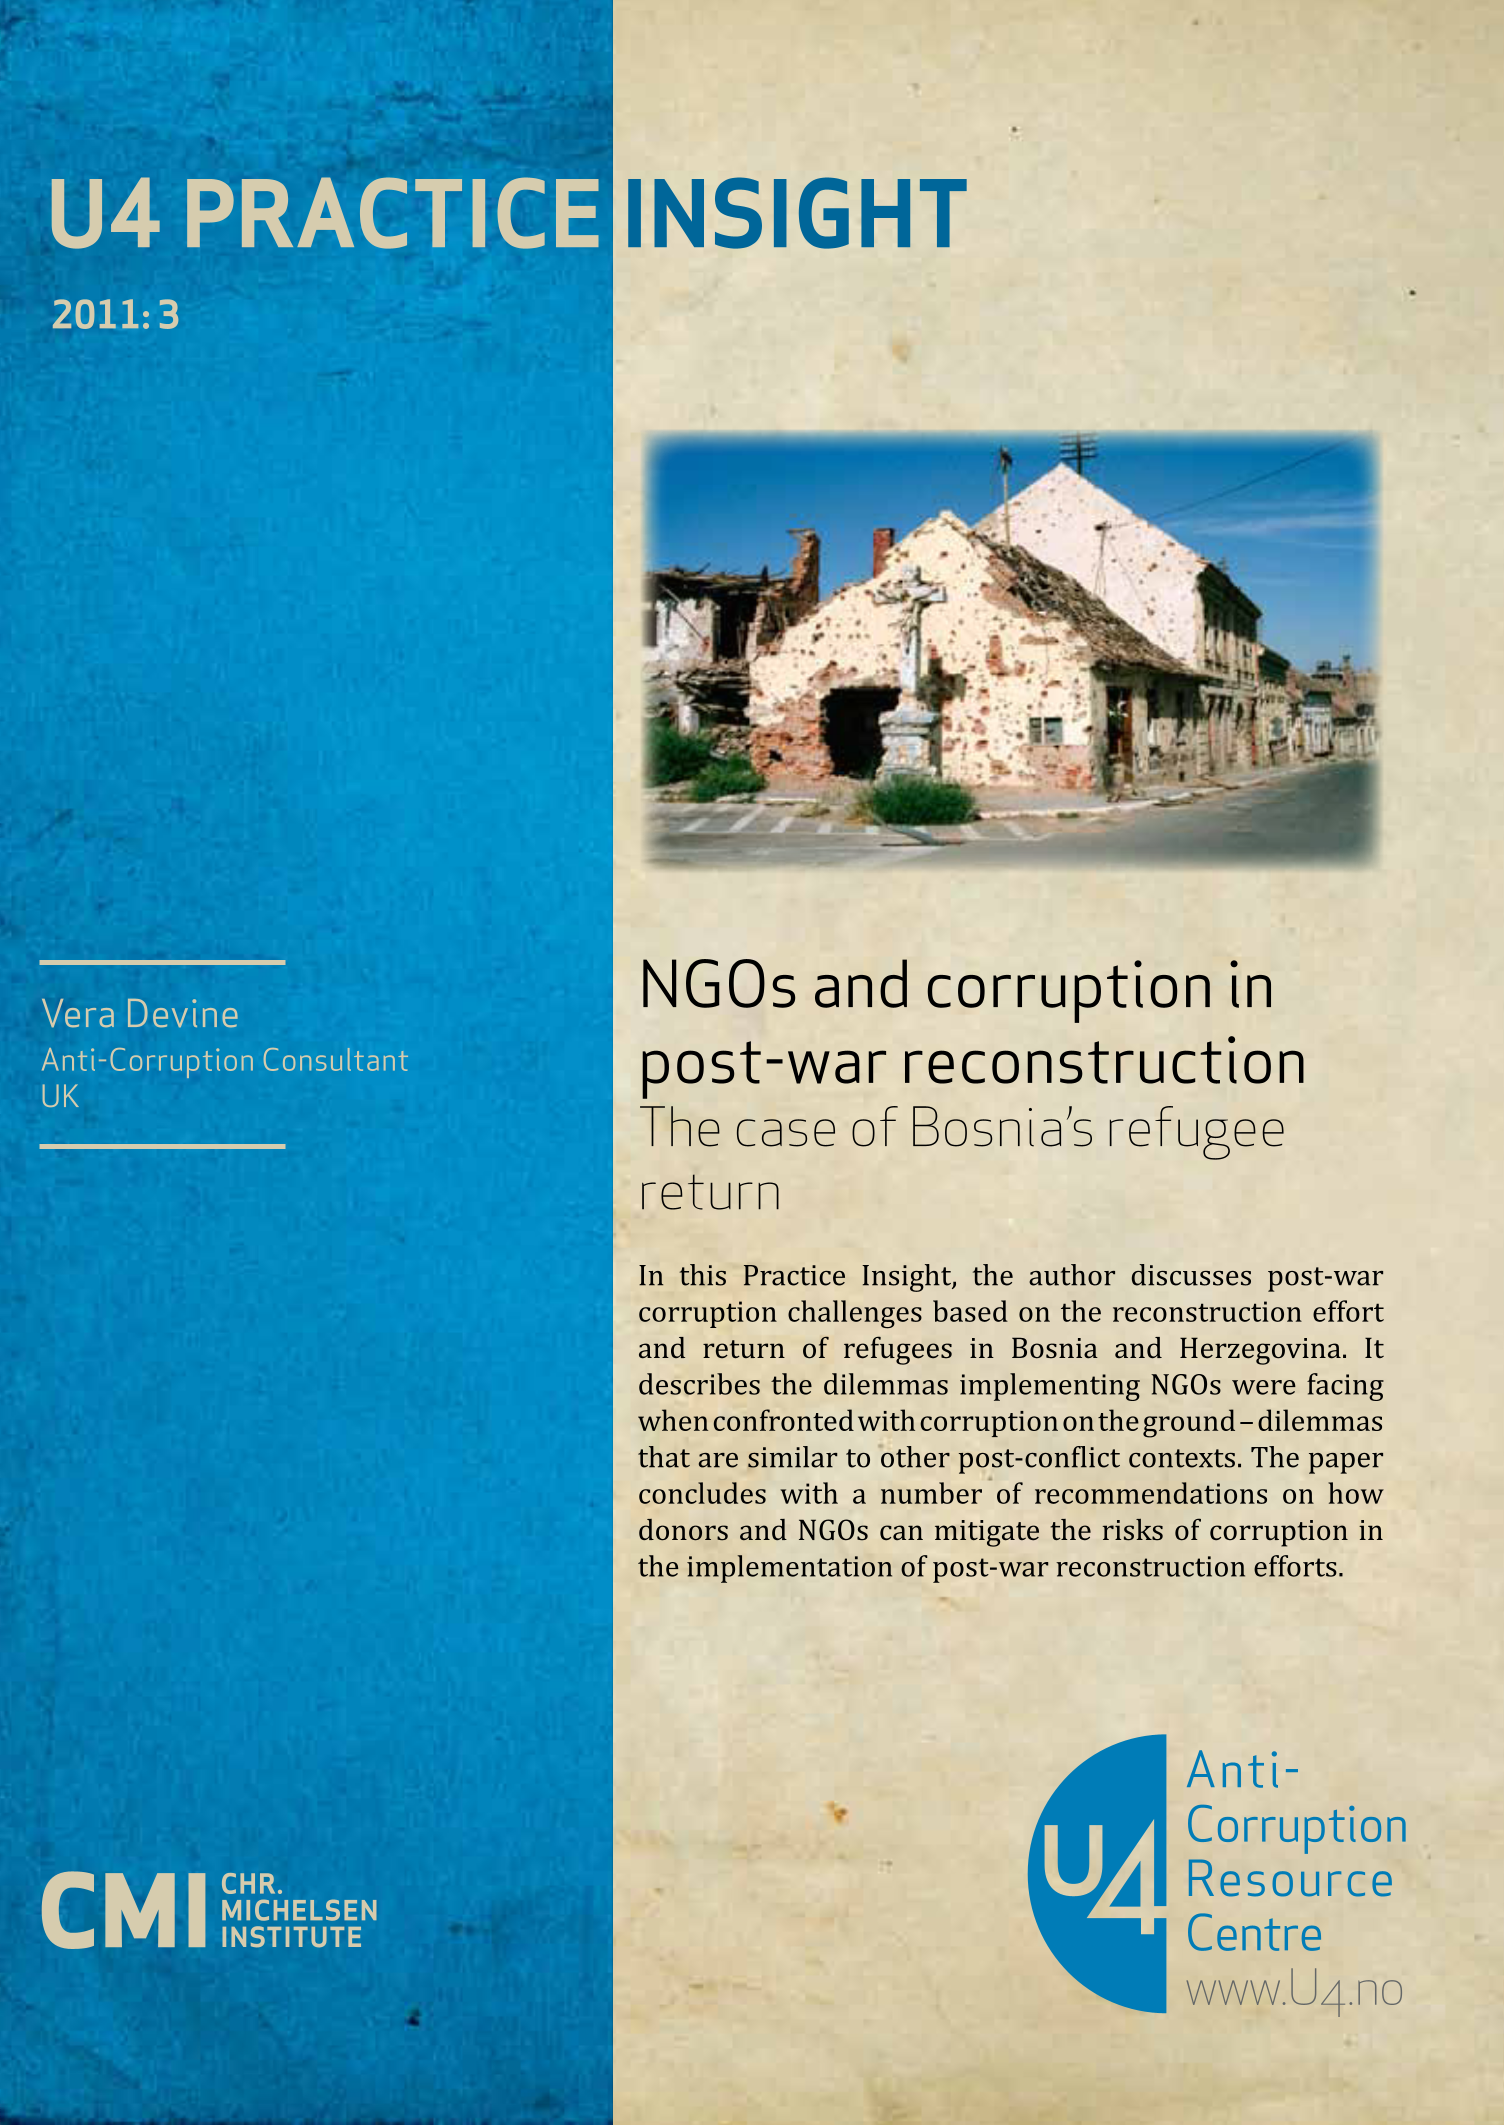 NGOs and corruption in post-war reconstruction: The case of Bosnia's refugee return